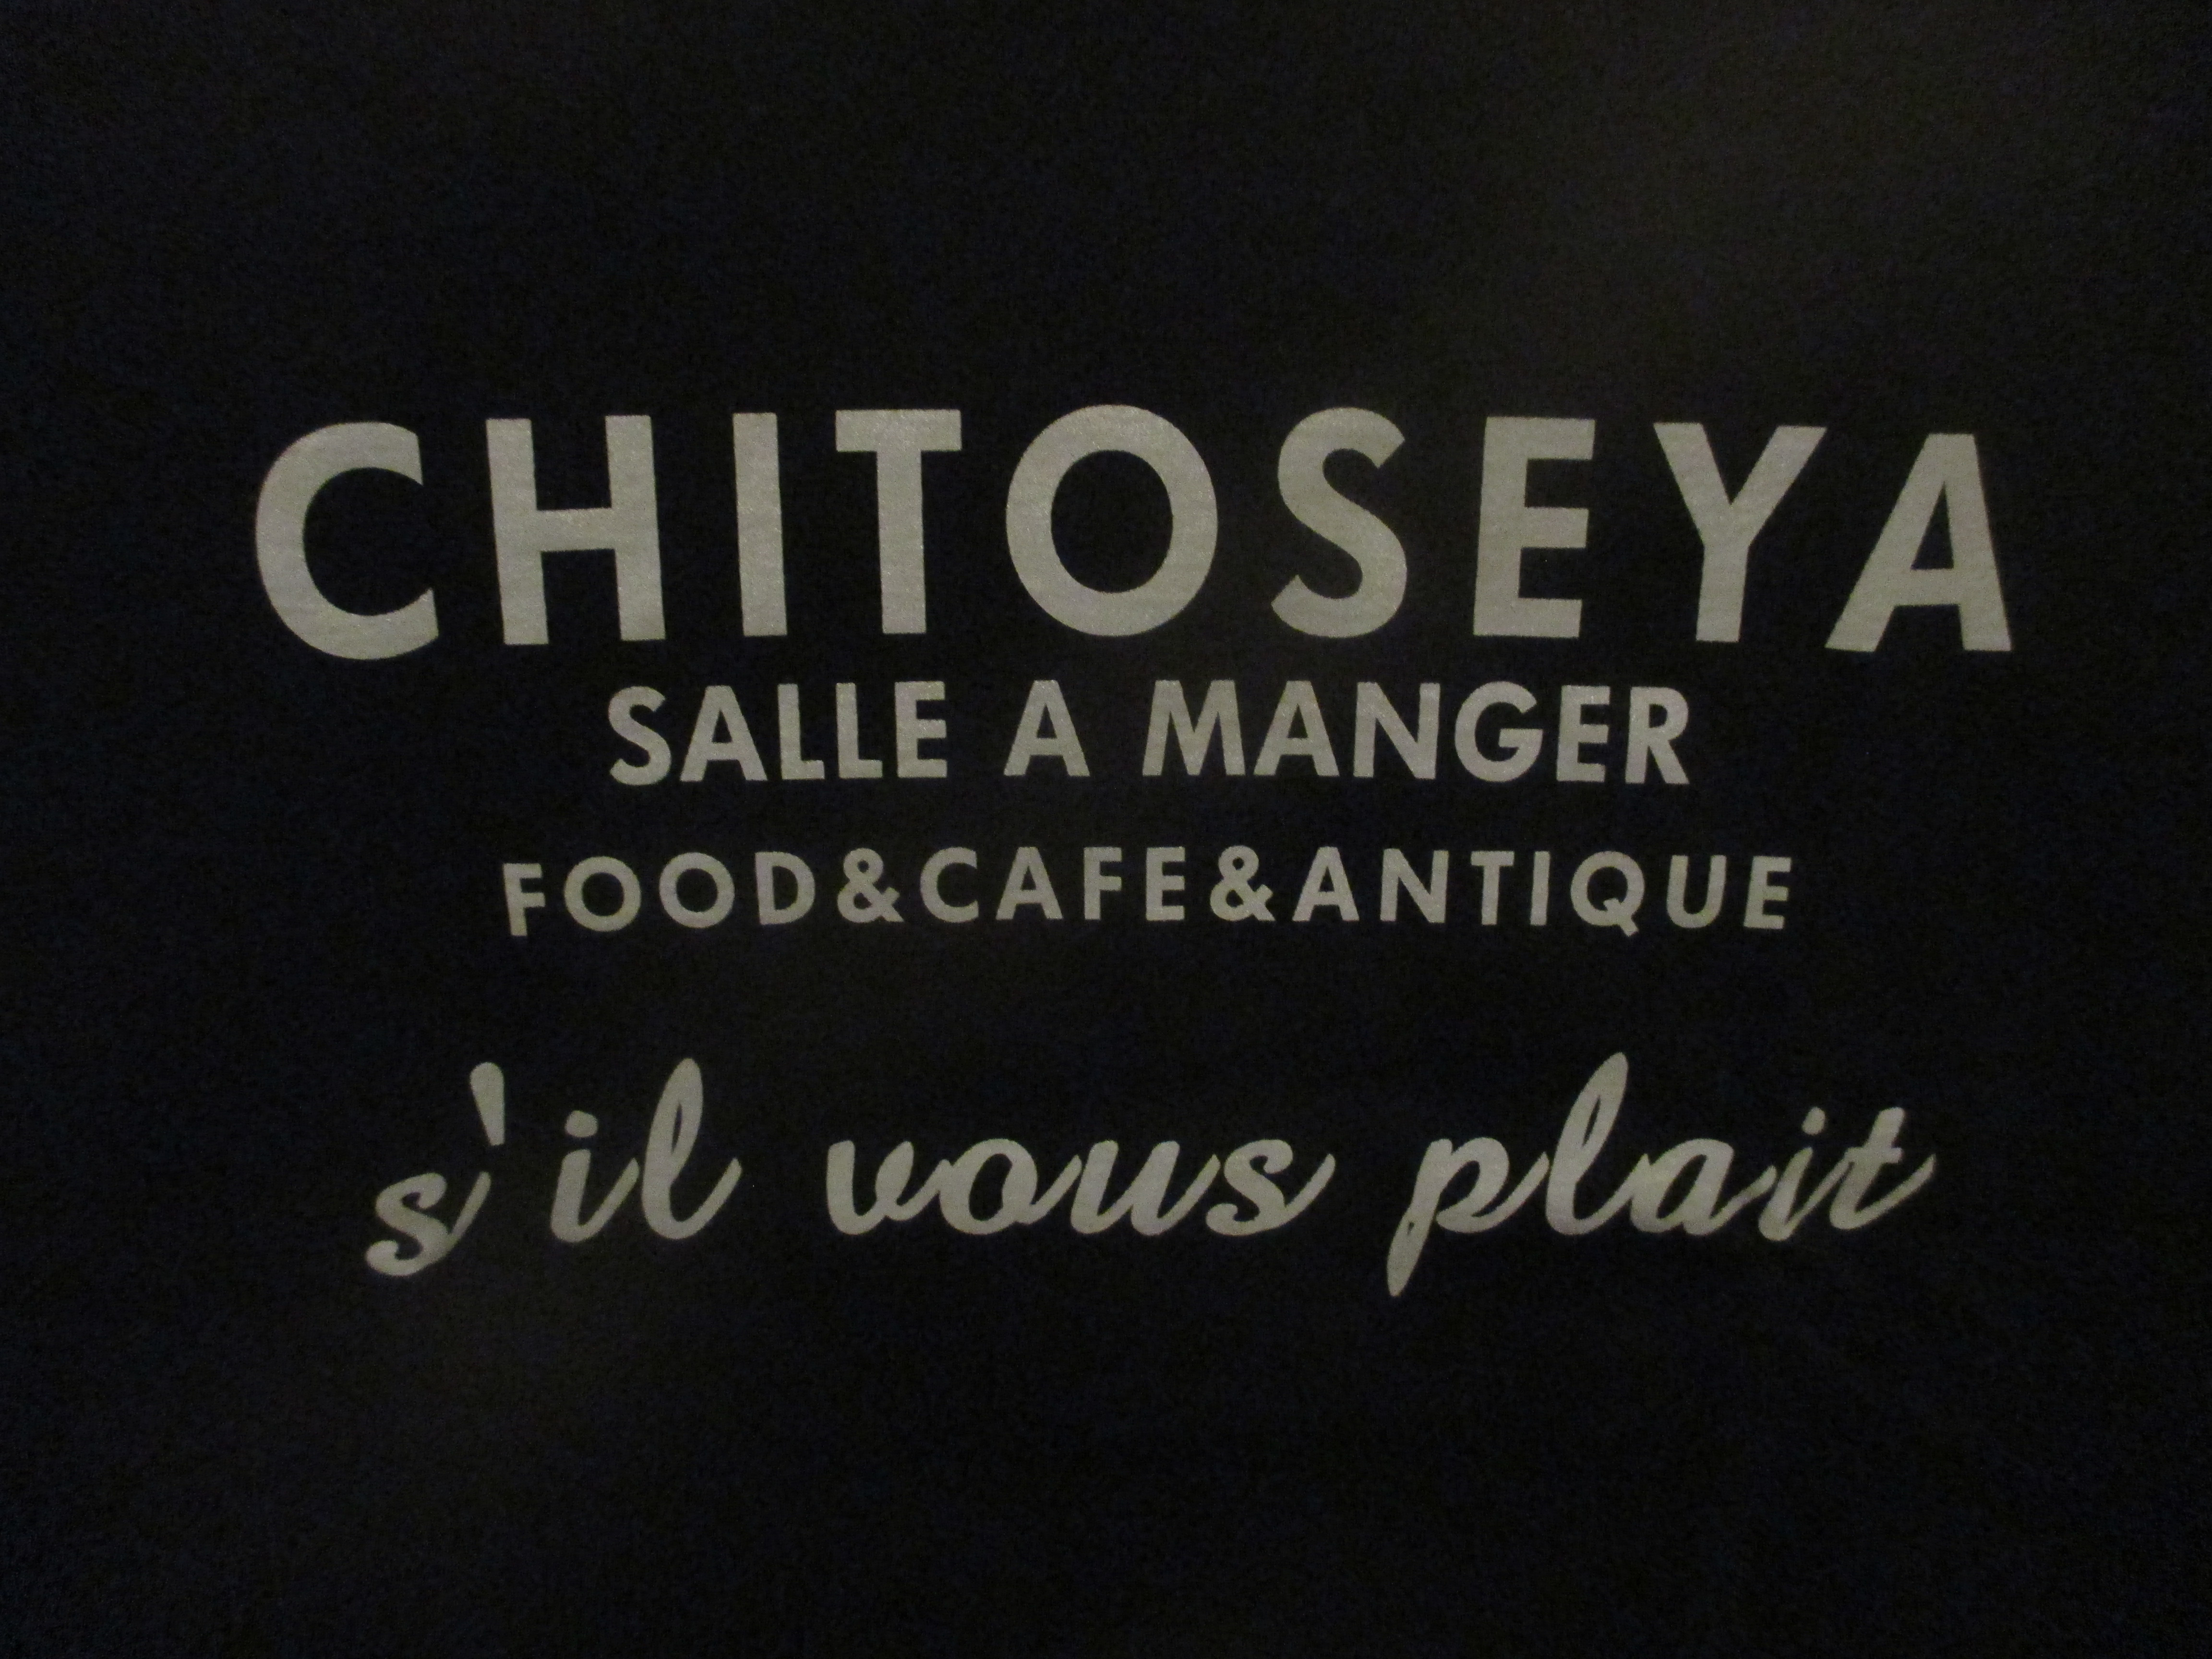 NEW COLOR ブラック×グレー Ｓalle A Manger CHITOSEYA SHOP Ｔシャツ　 sil vous plait 